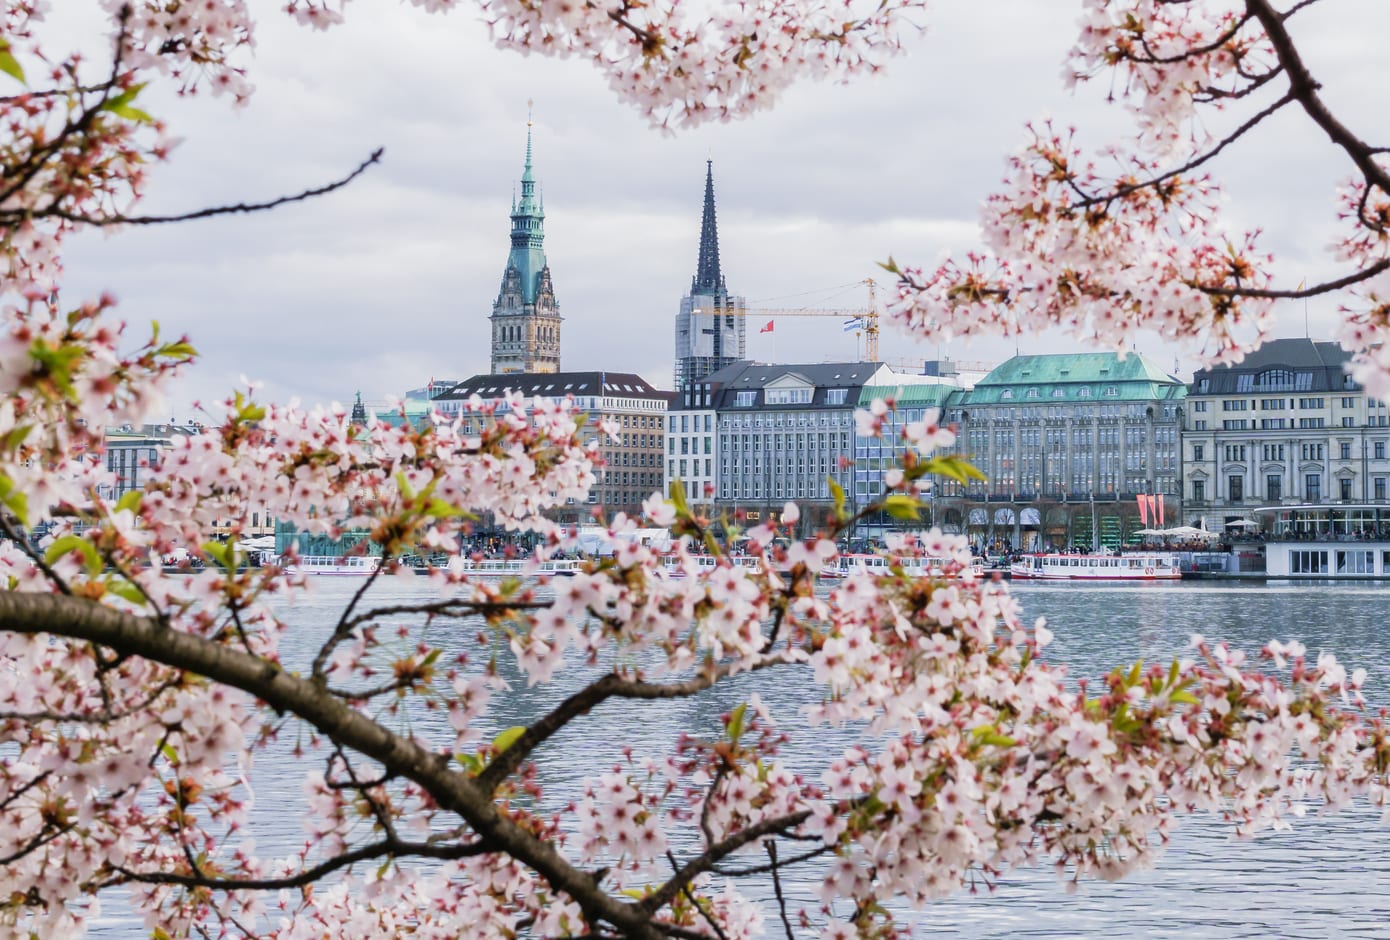 View of Hamburg townhall - Rathaus, Alster river, and a cherry blossom tree at spring day.
